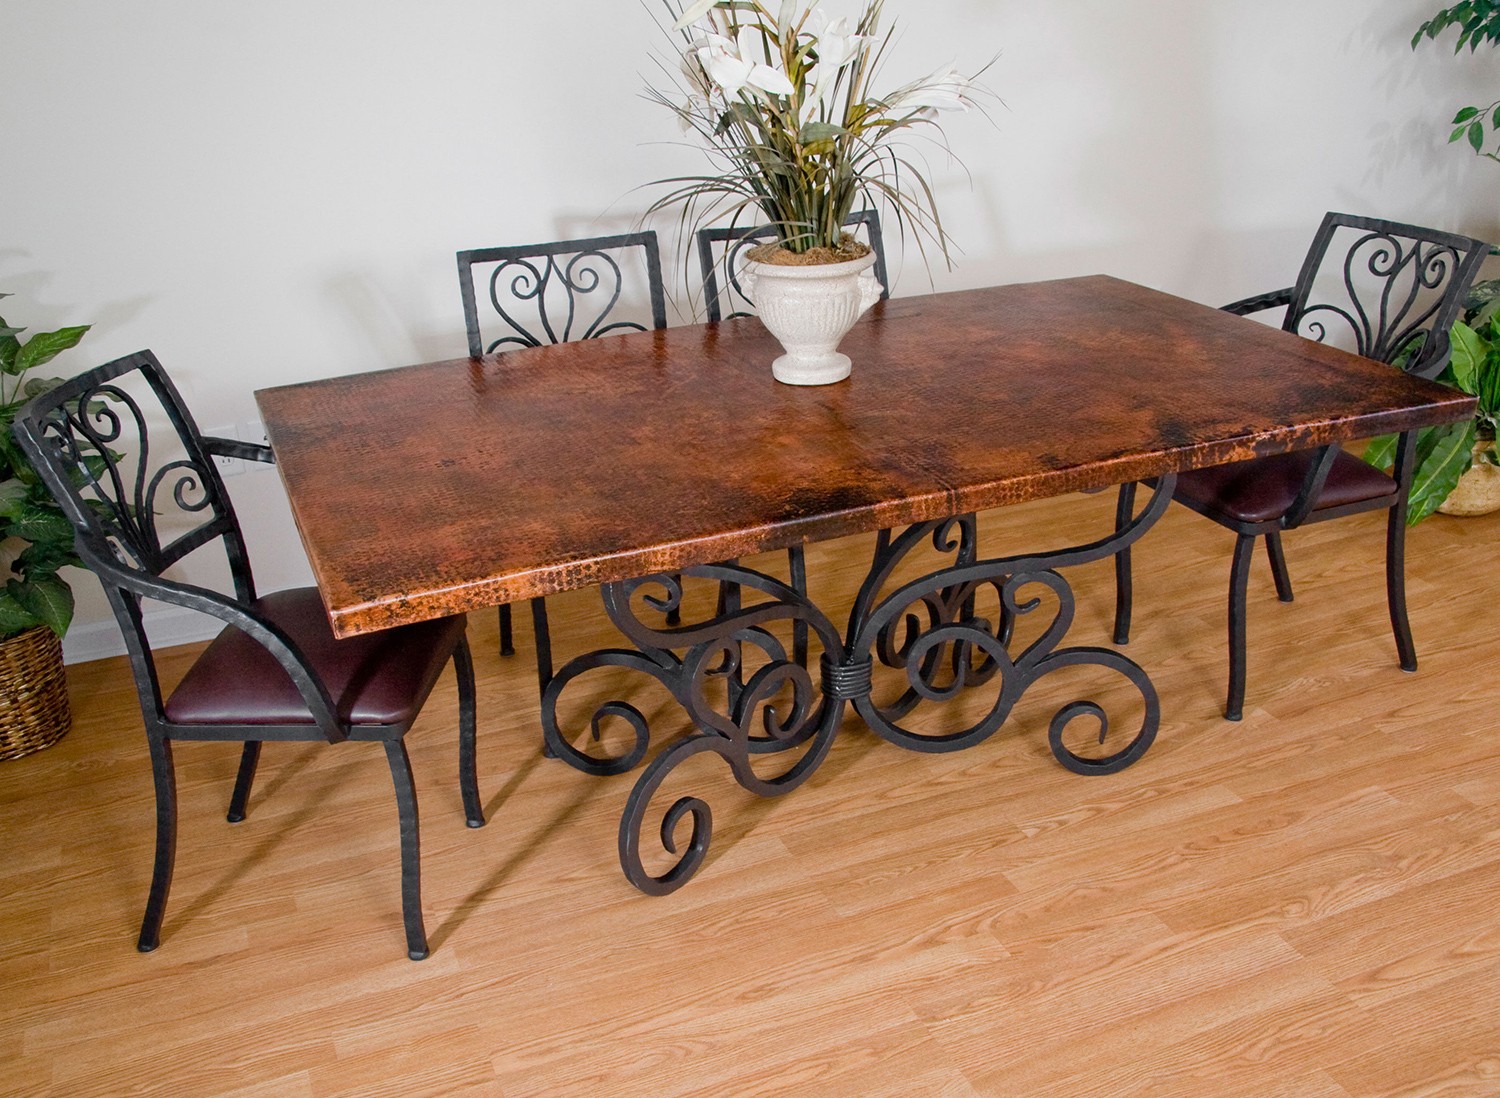 Branded wrought iron tables three featured manufacturers